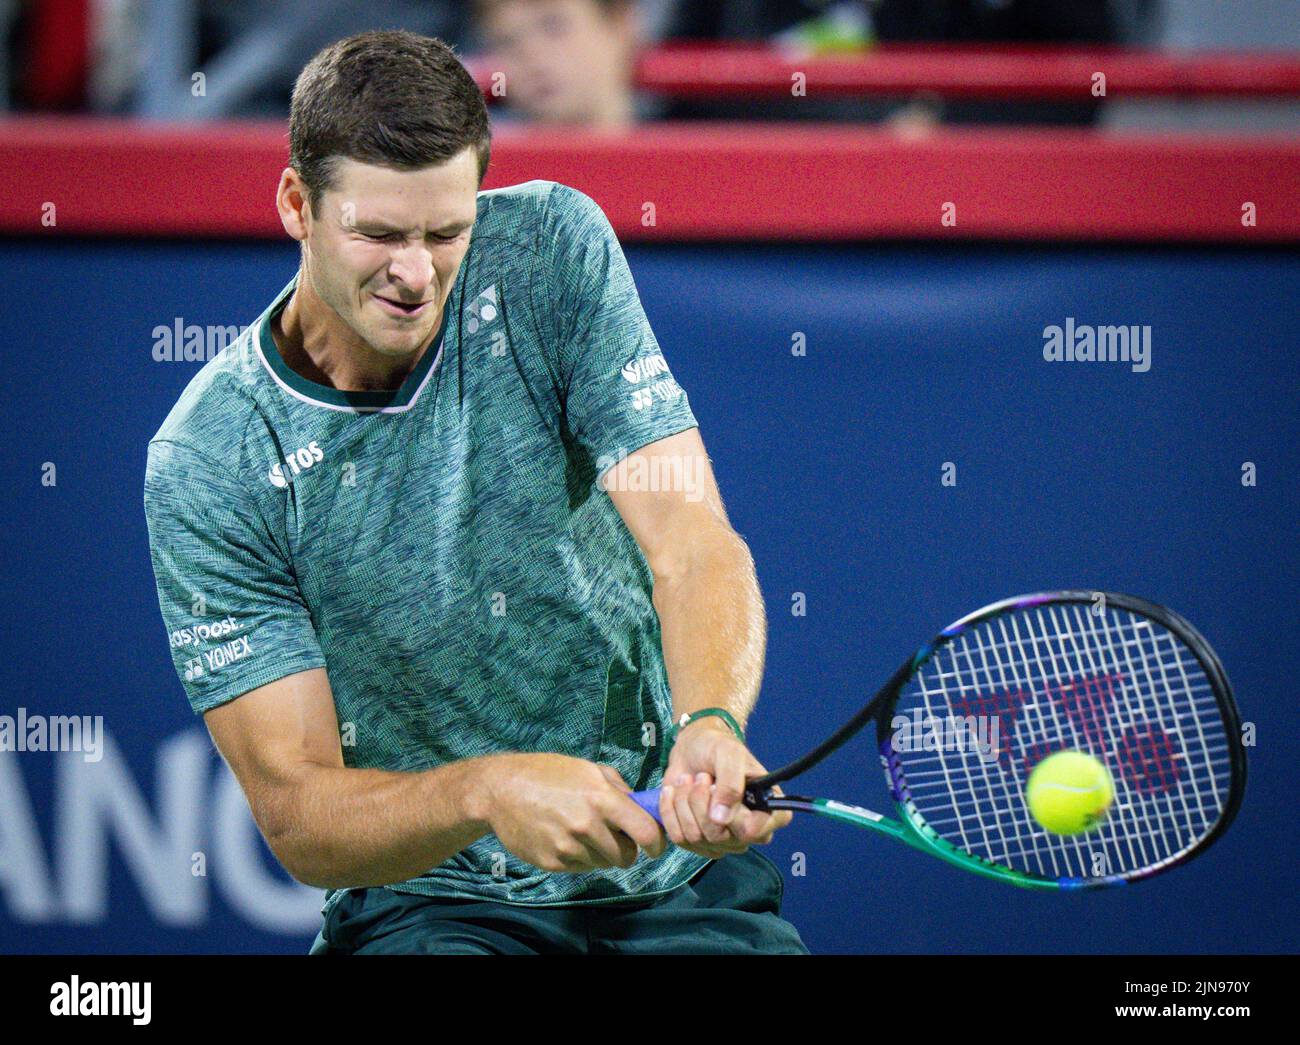 Hubert Hurkacz of Poland hits a shot during his match against Emil Ruusuvuori of Finland at the National Bank Open at Stade IGA on August 8, 2022 in Montreal, Canada. Montreal, Quebec, Canada August 8, 2022. (Photo by Mathieu Belanger/AFLO) Stock Photo